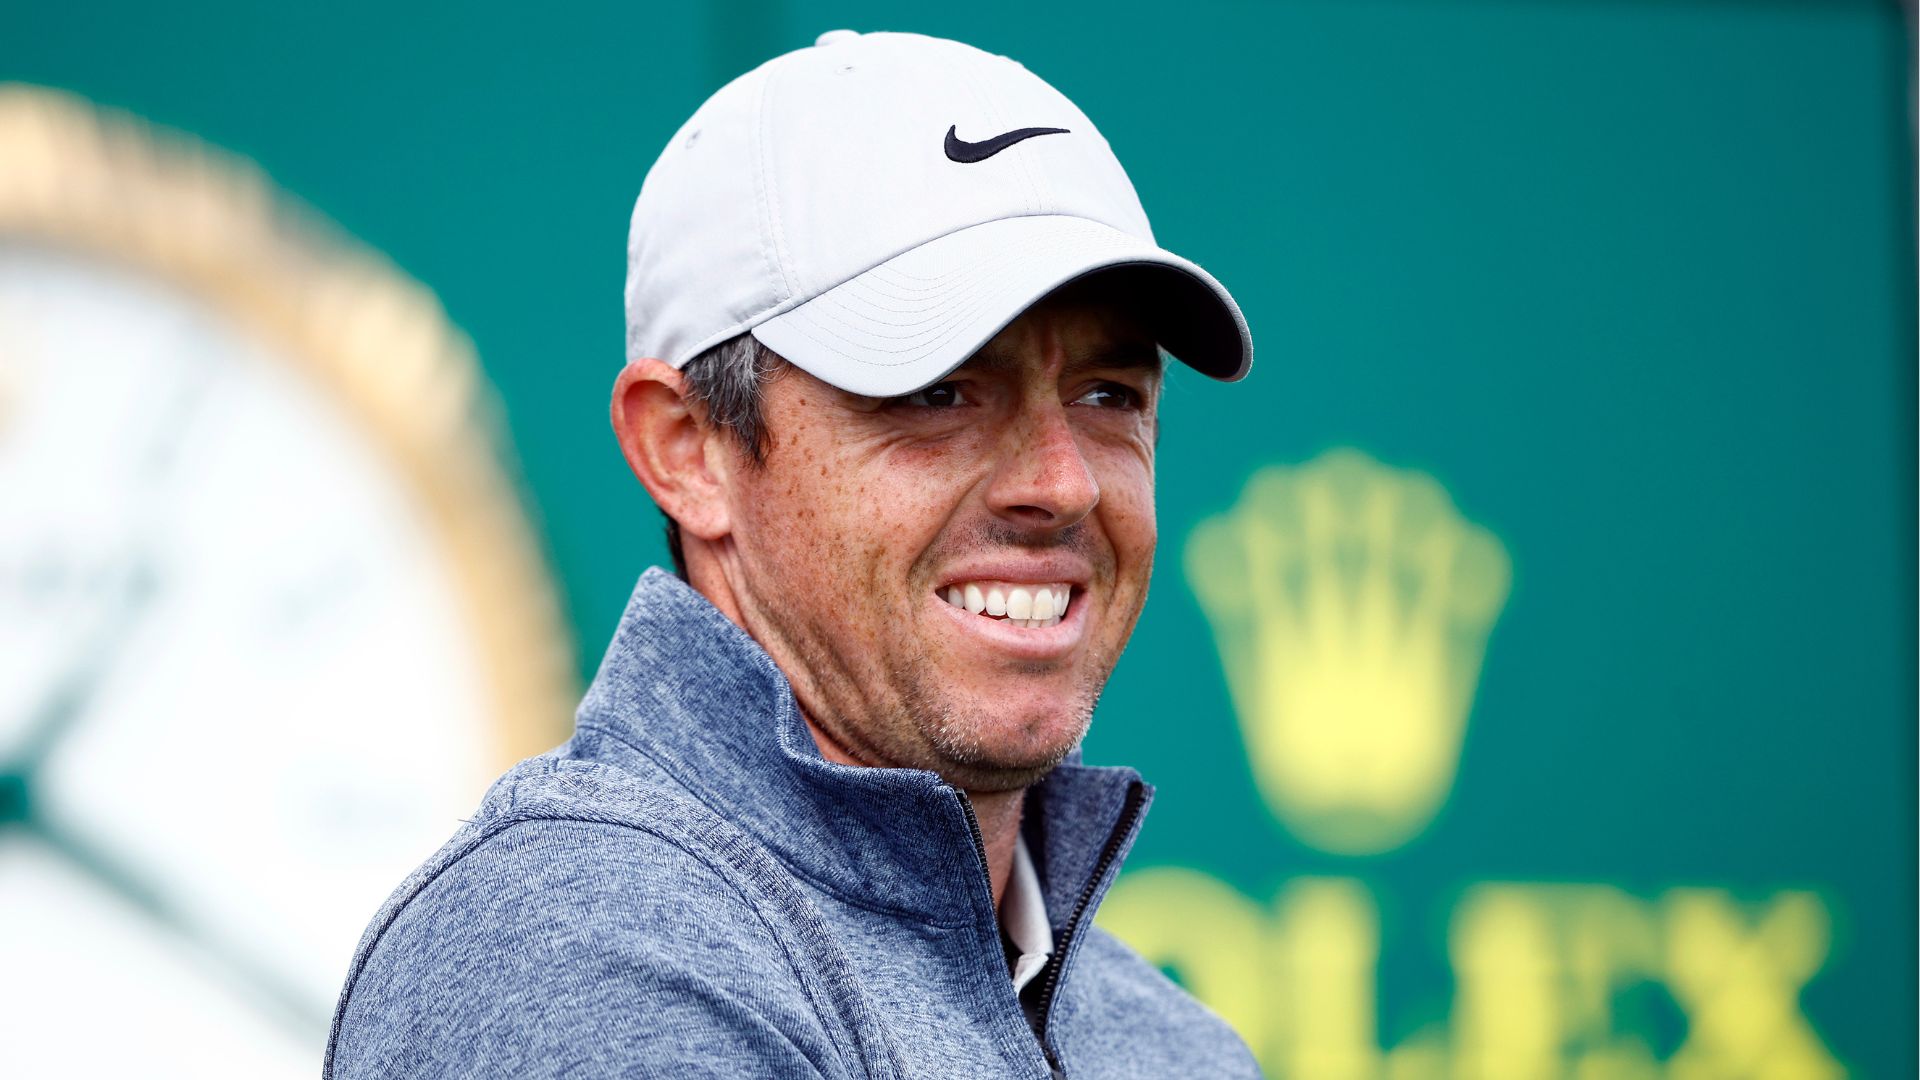 Amid ‘mixed emotions’ on designated events, Rory McIlroy says PGA Tour won’t be ‘closed shop’